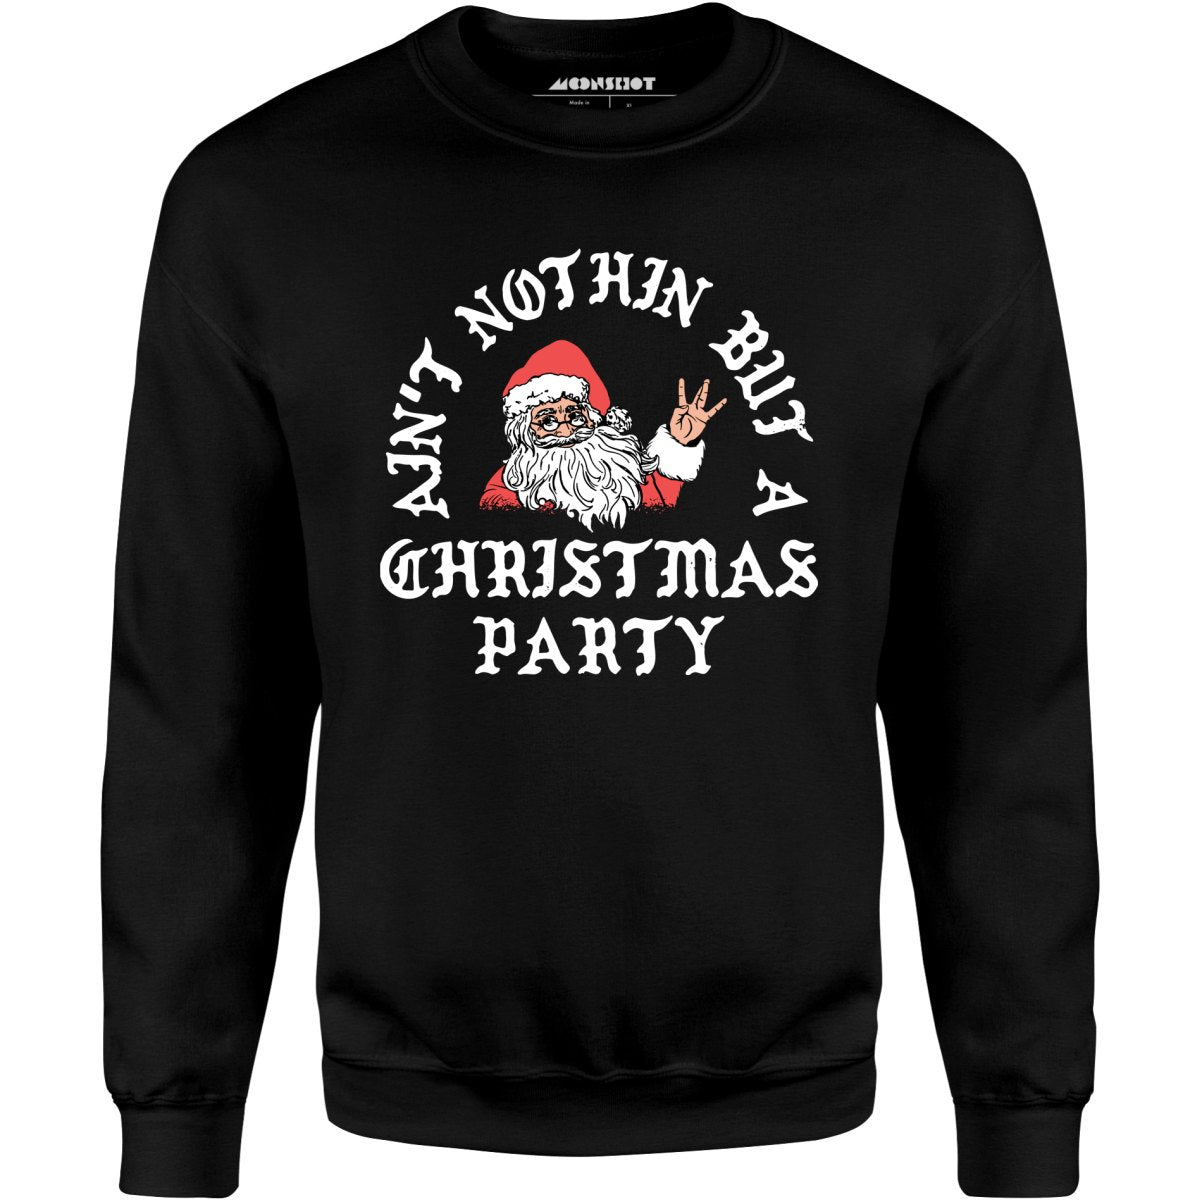 Ain't Nothin' But a Christmas Party - Unisex Sweatshirt